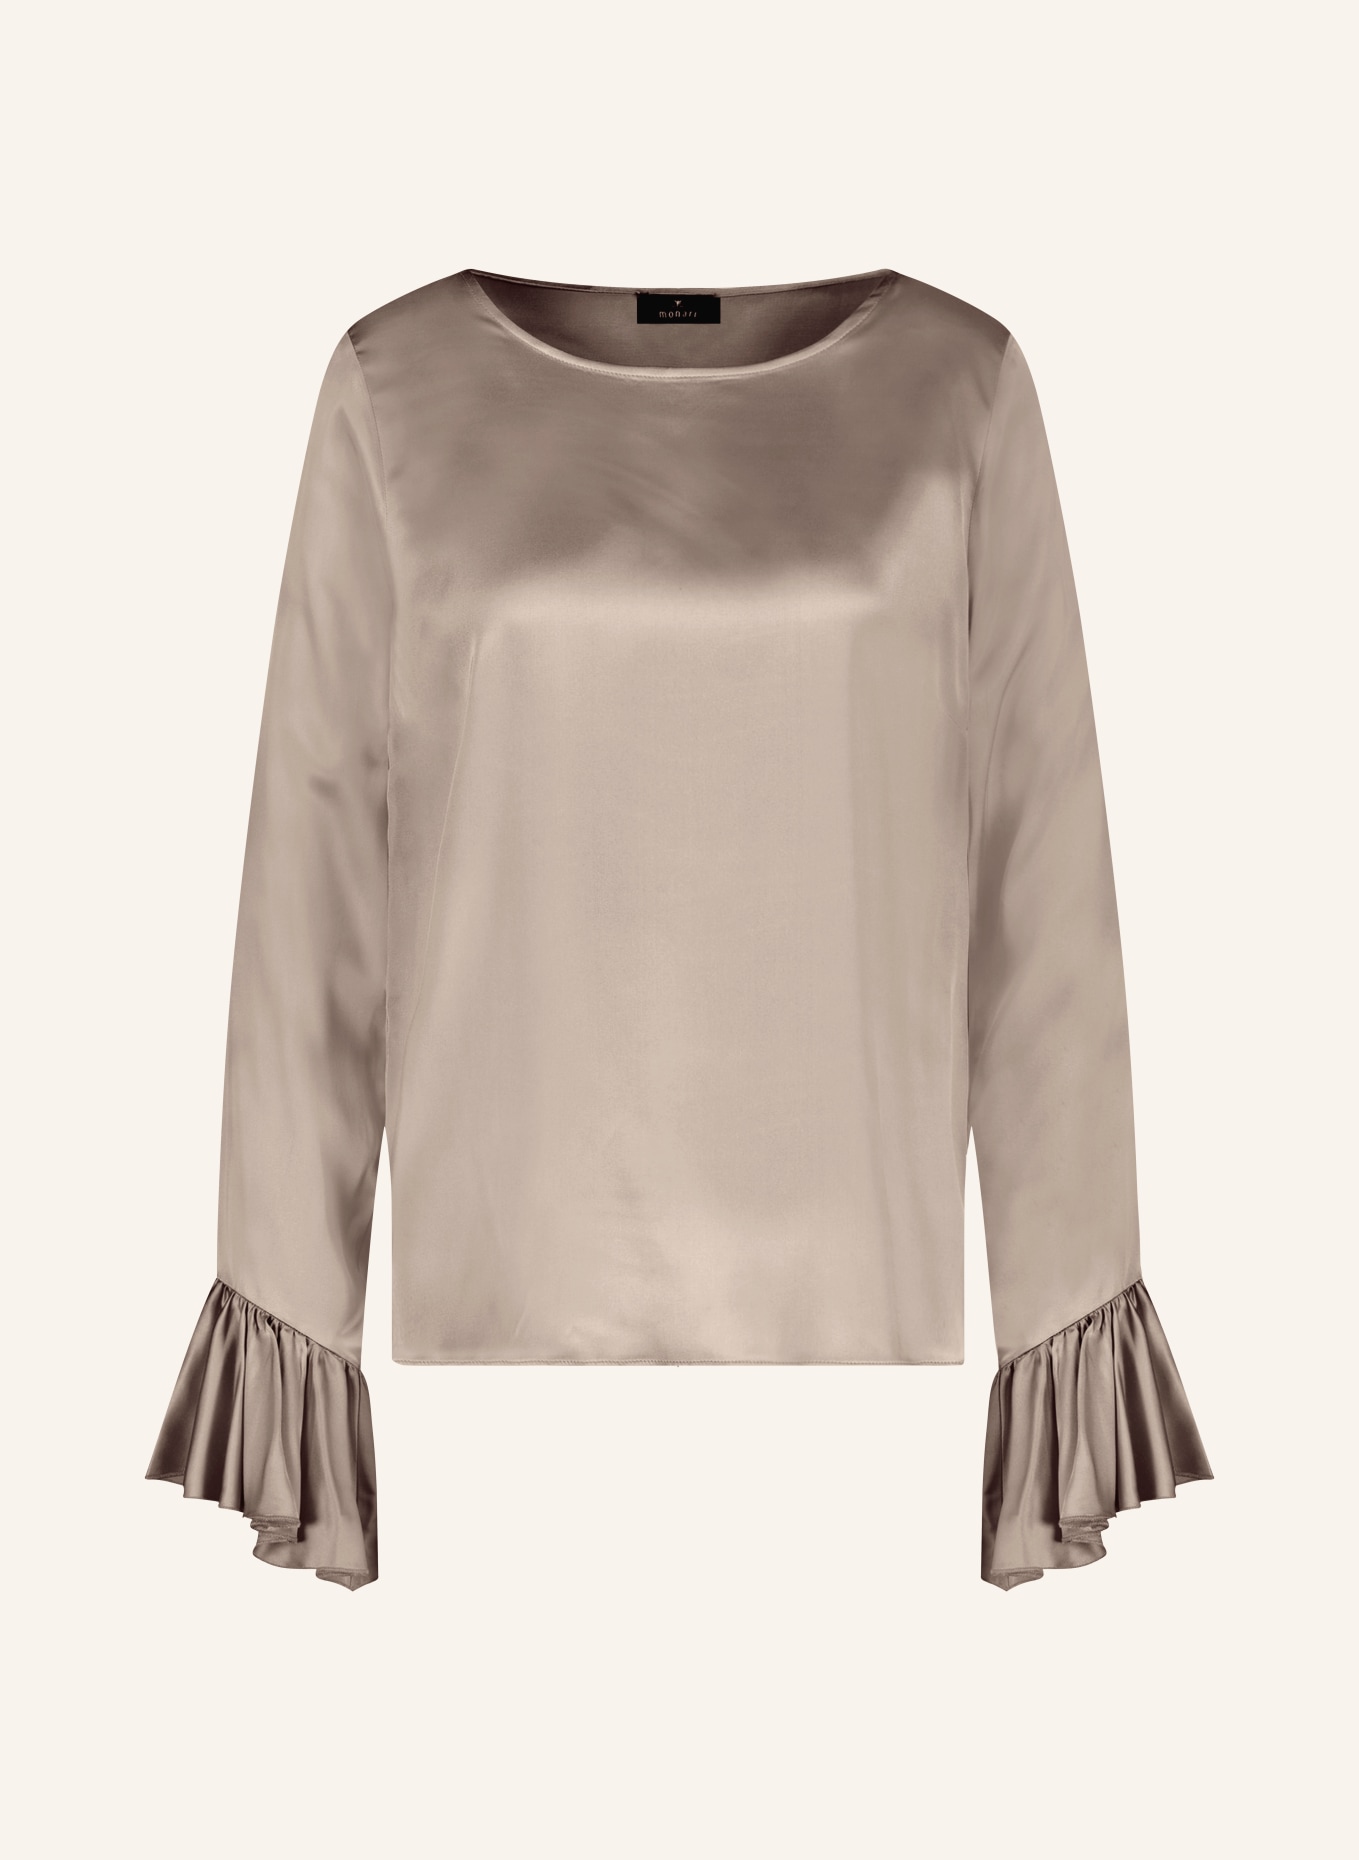 monari Shirt blouse in satin taupe in frills with